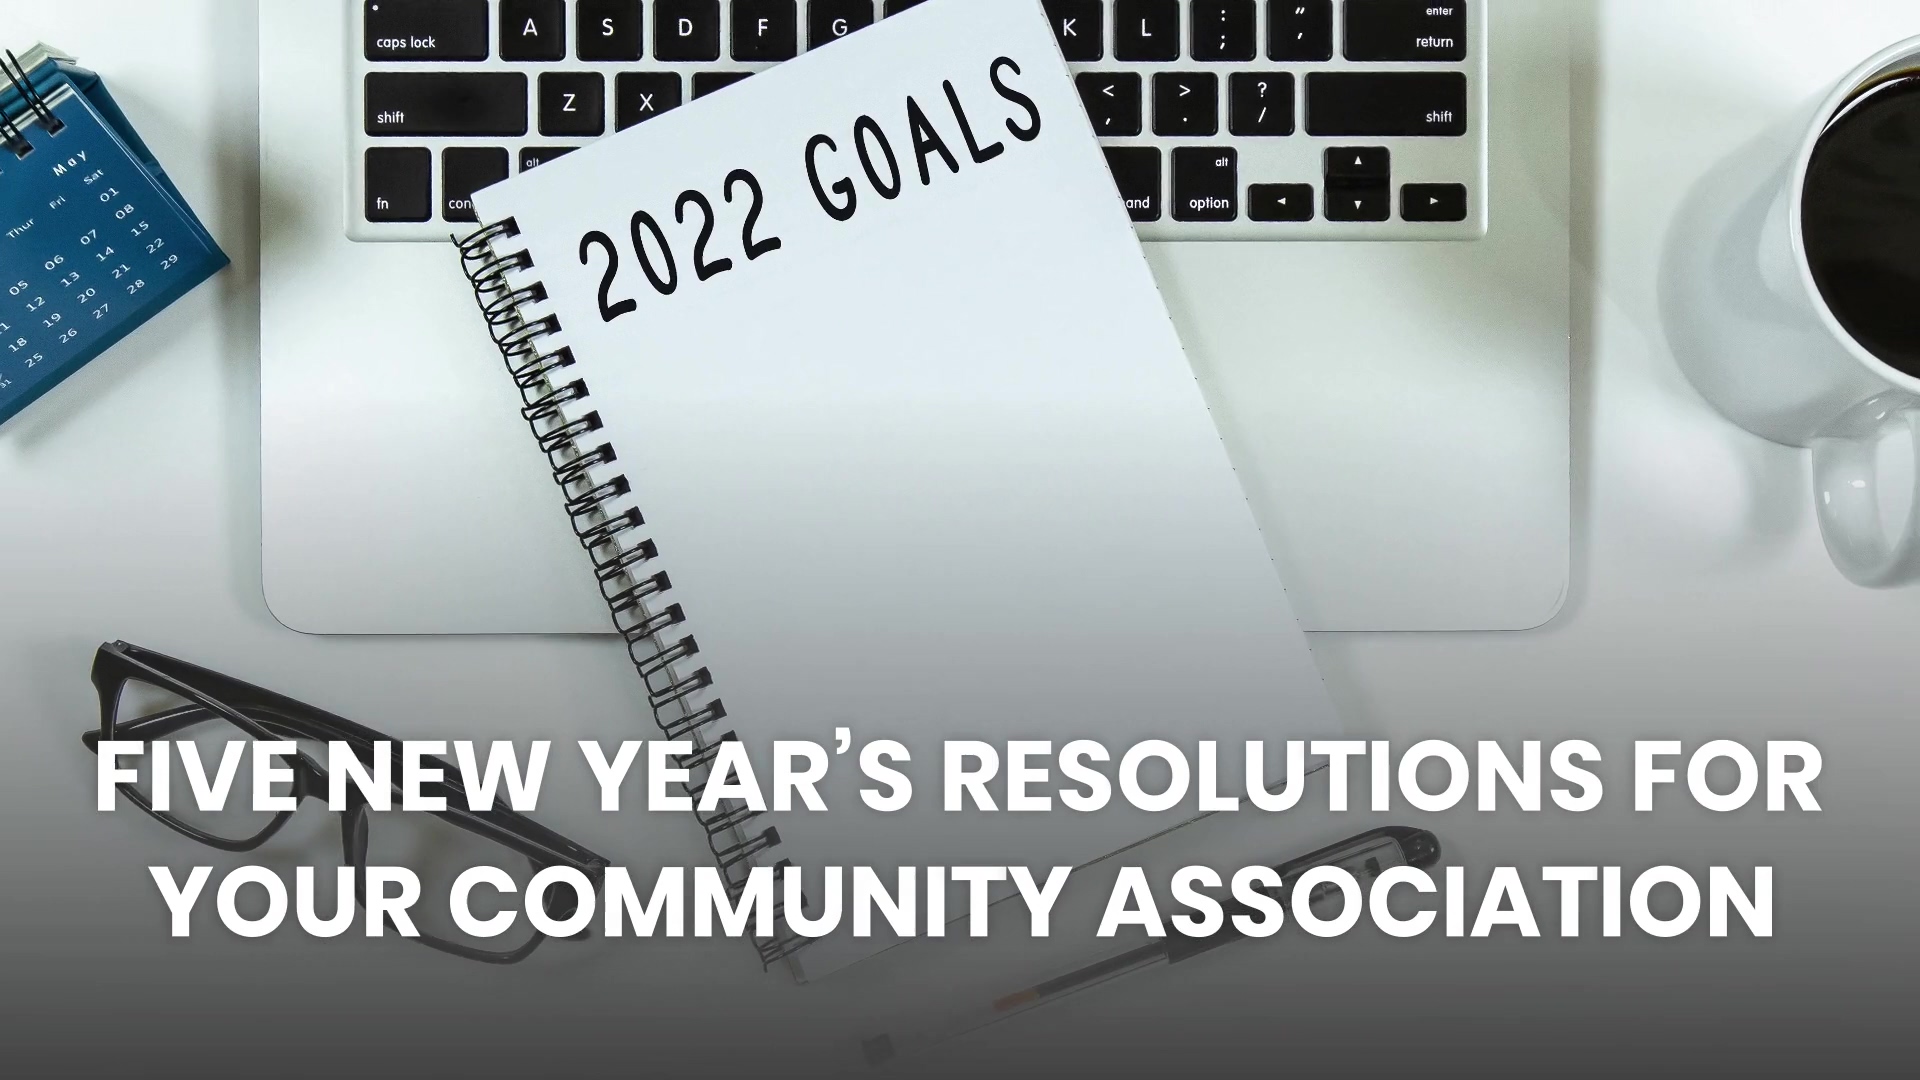 RealManage - Five New Year’s Resolutions for Your Community Association.mp4